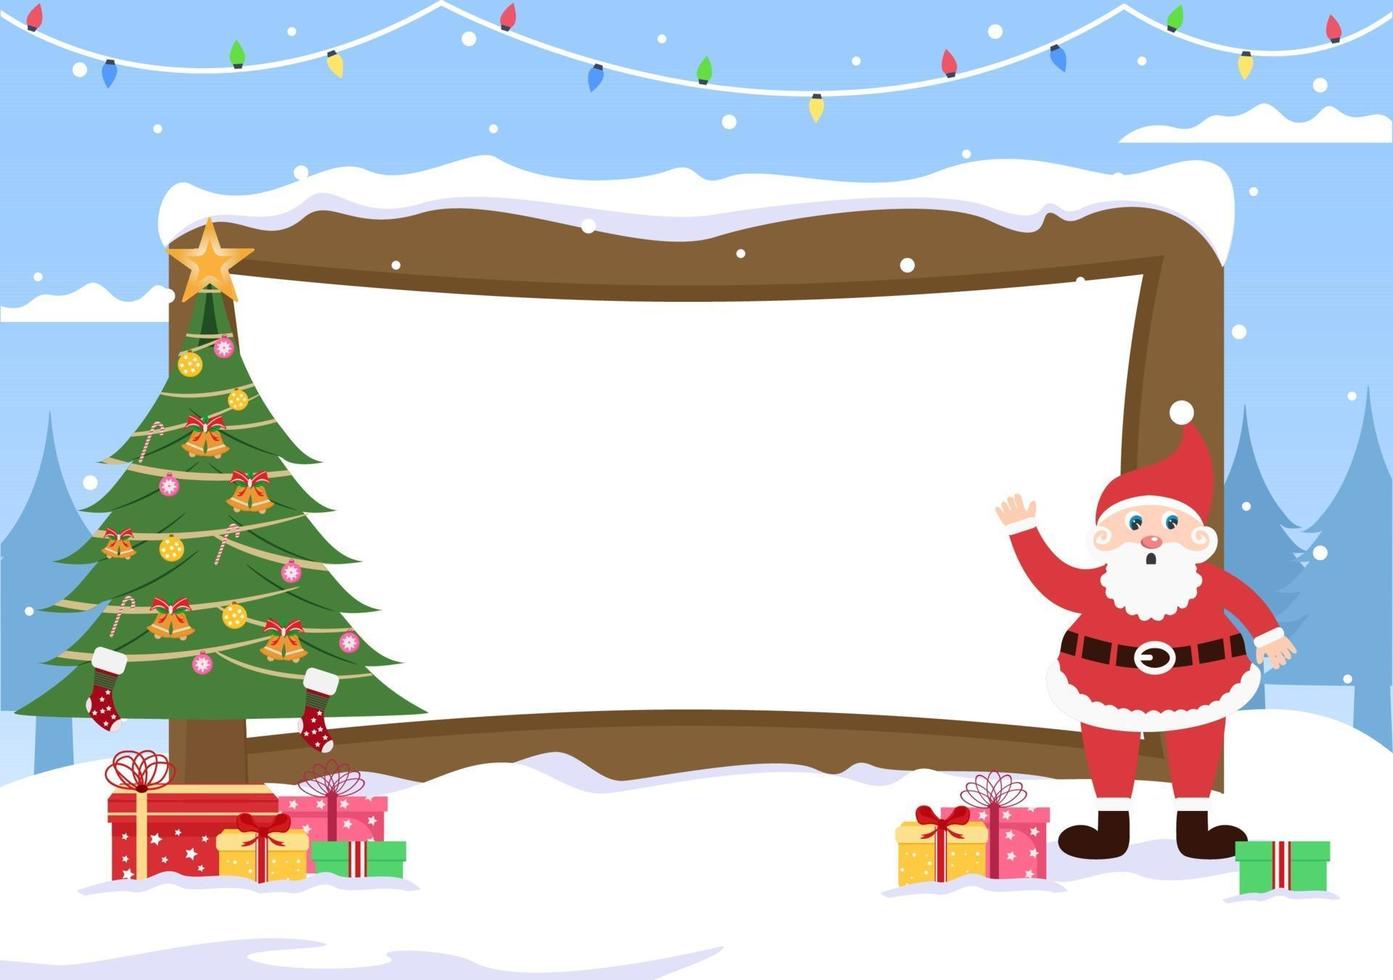 Merry Christmas With Santa Claus or Snowman Cartoon To The Signboard vector